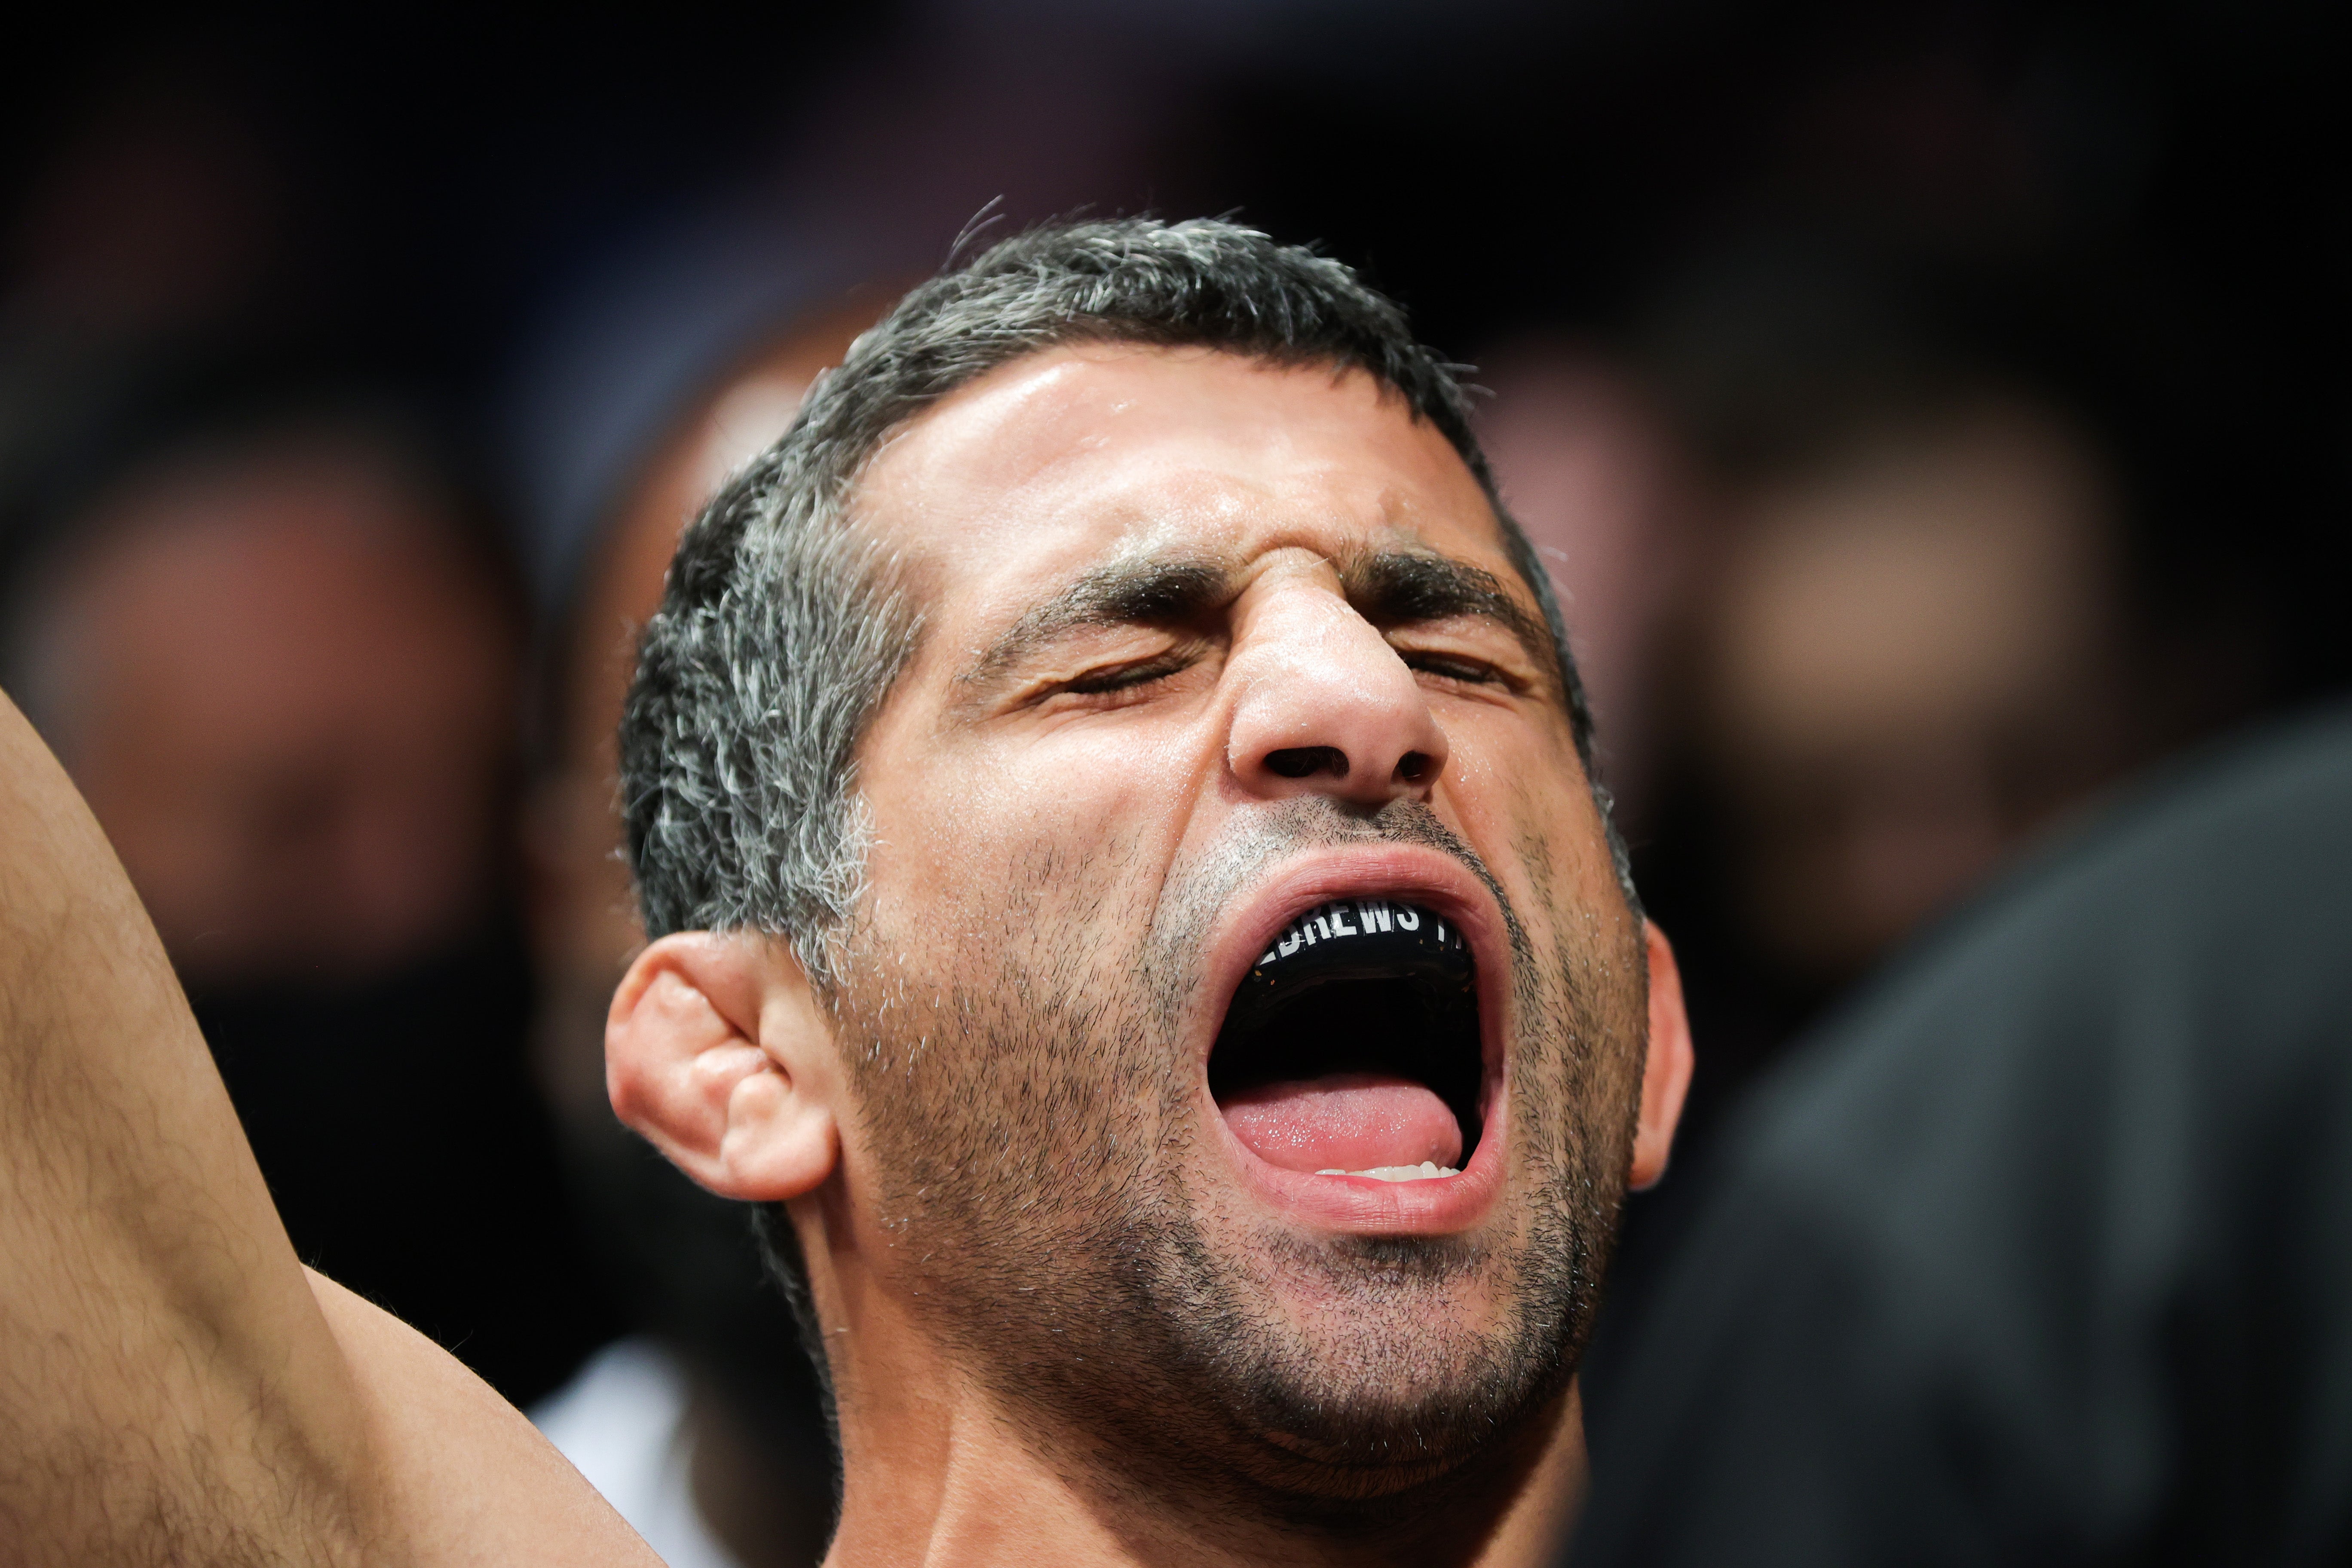 Dariush outpointed Ferguson with relative ease at UFC 262